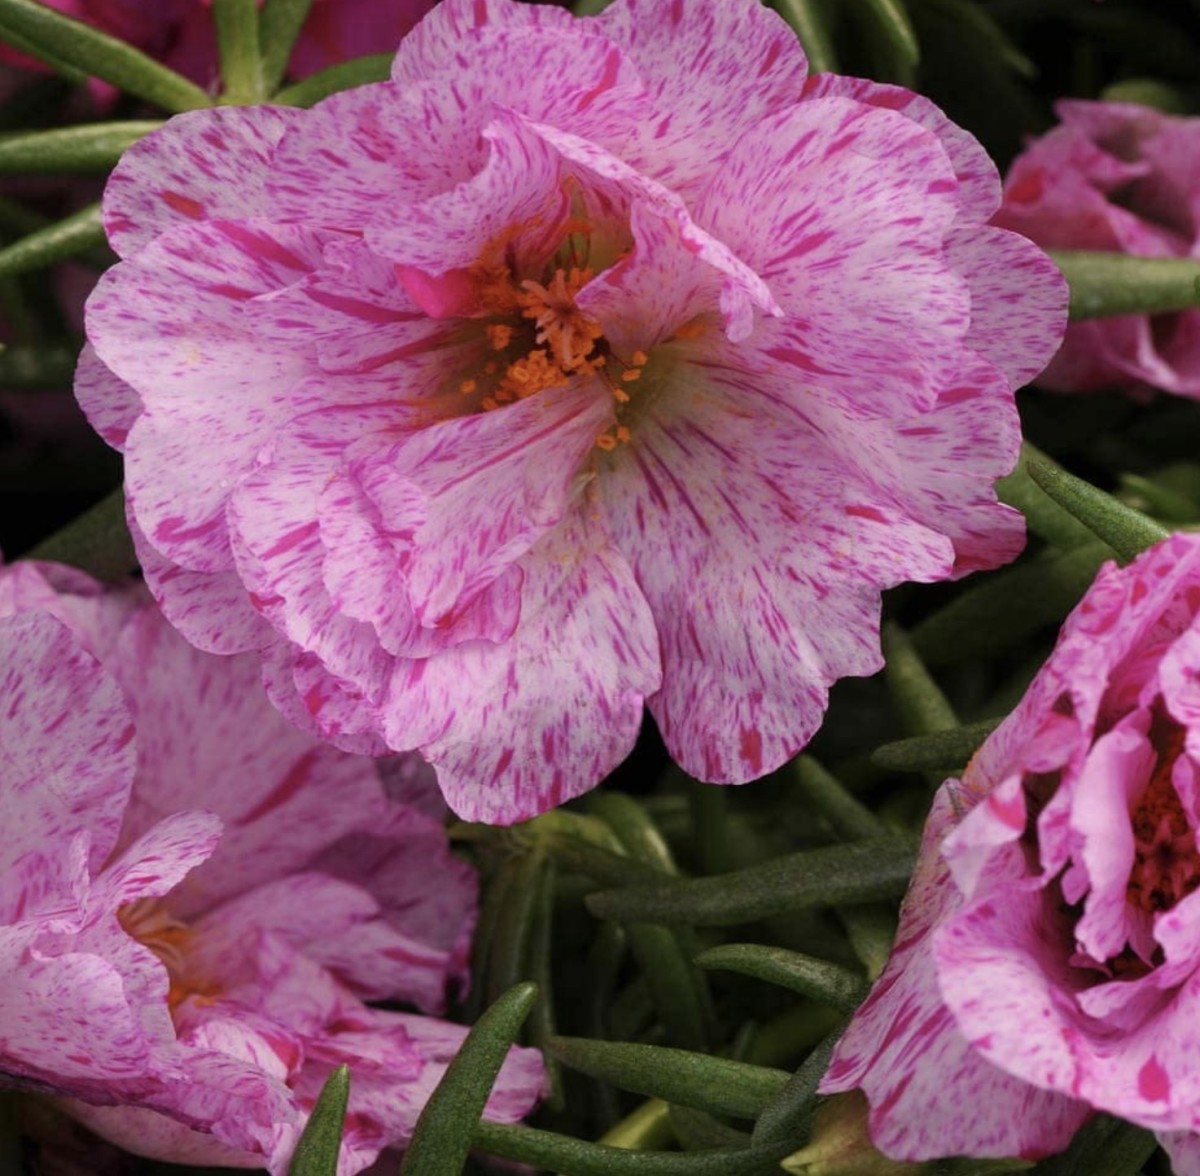 The Happy Hour Peppermint variety of moss rose.